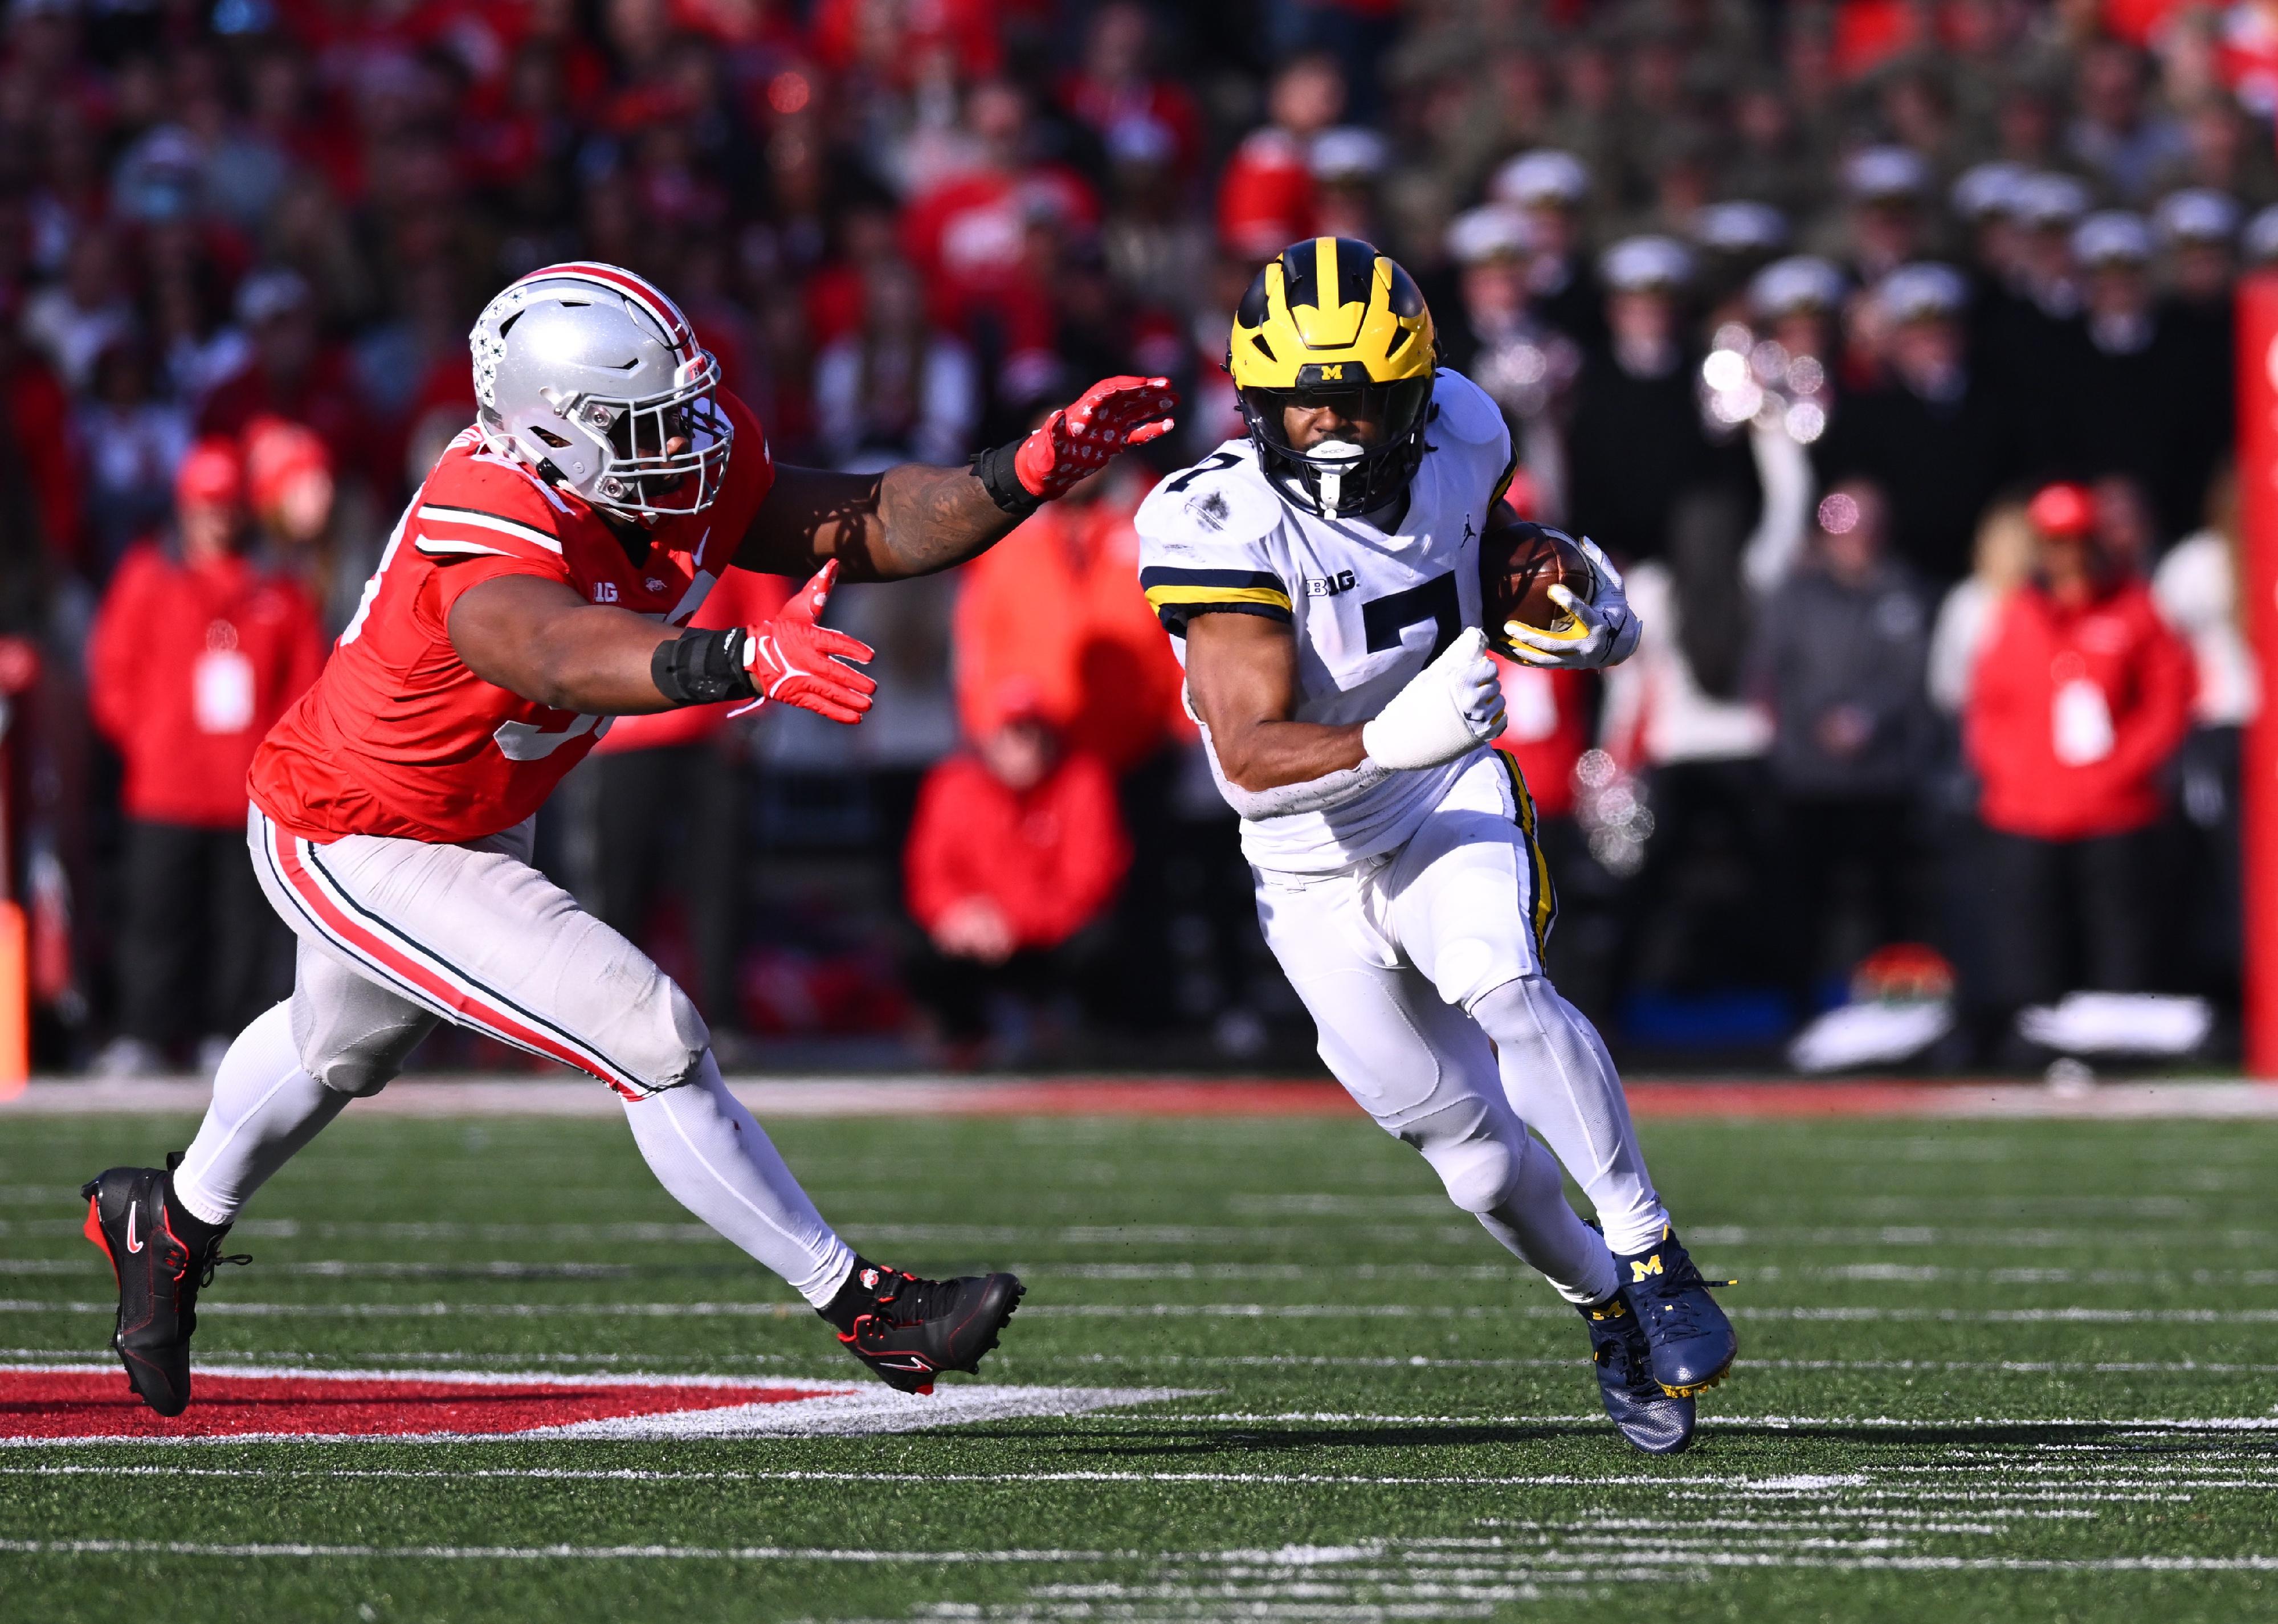 Donovan Edwards of the Michigan Wolverines runs with the ball during a game against the Ohio State Buckeyes.